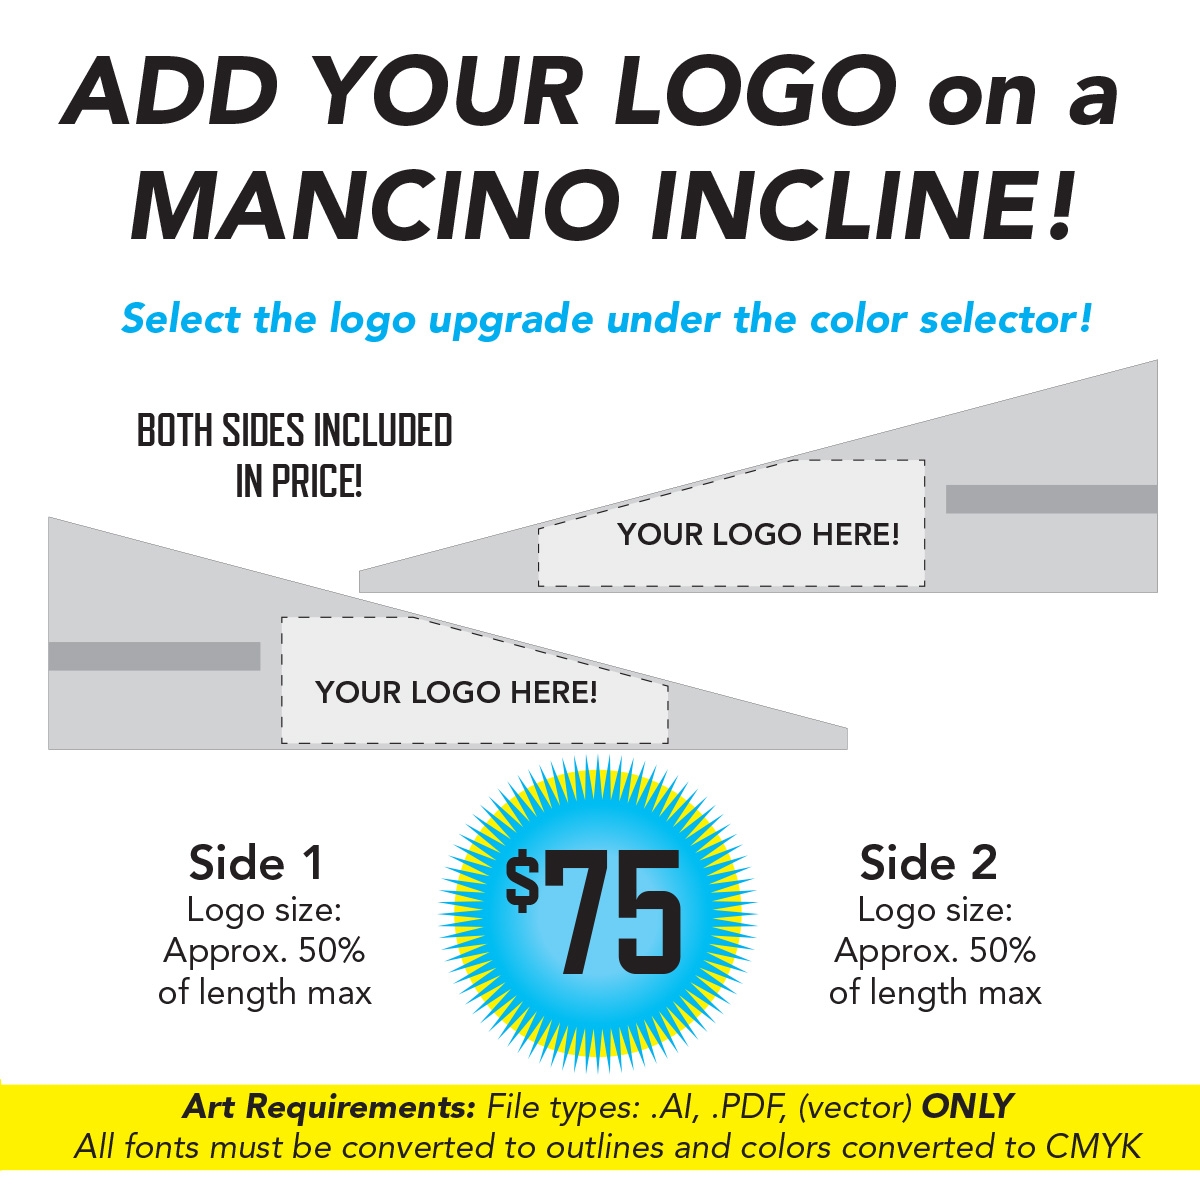 logo addition and branding from mancino on an incline mat - mancino  incline cheese wedge mats